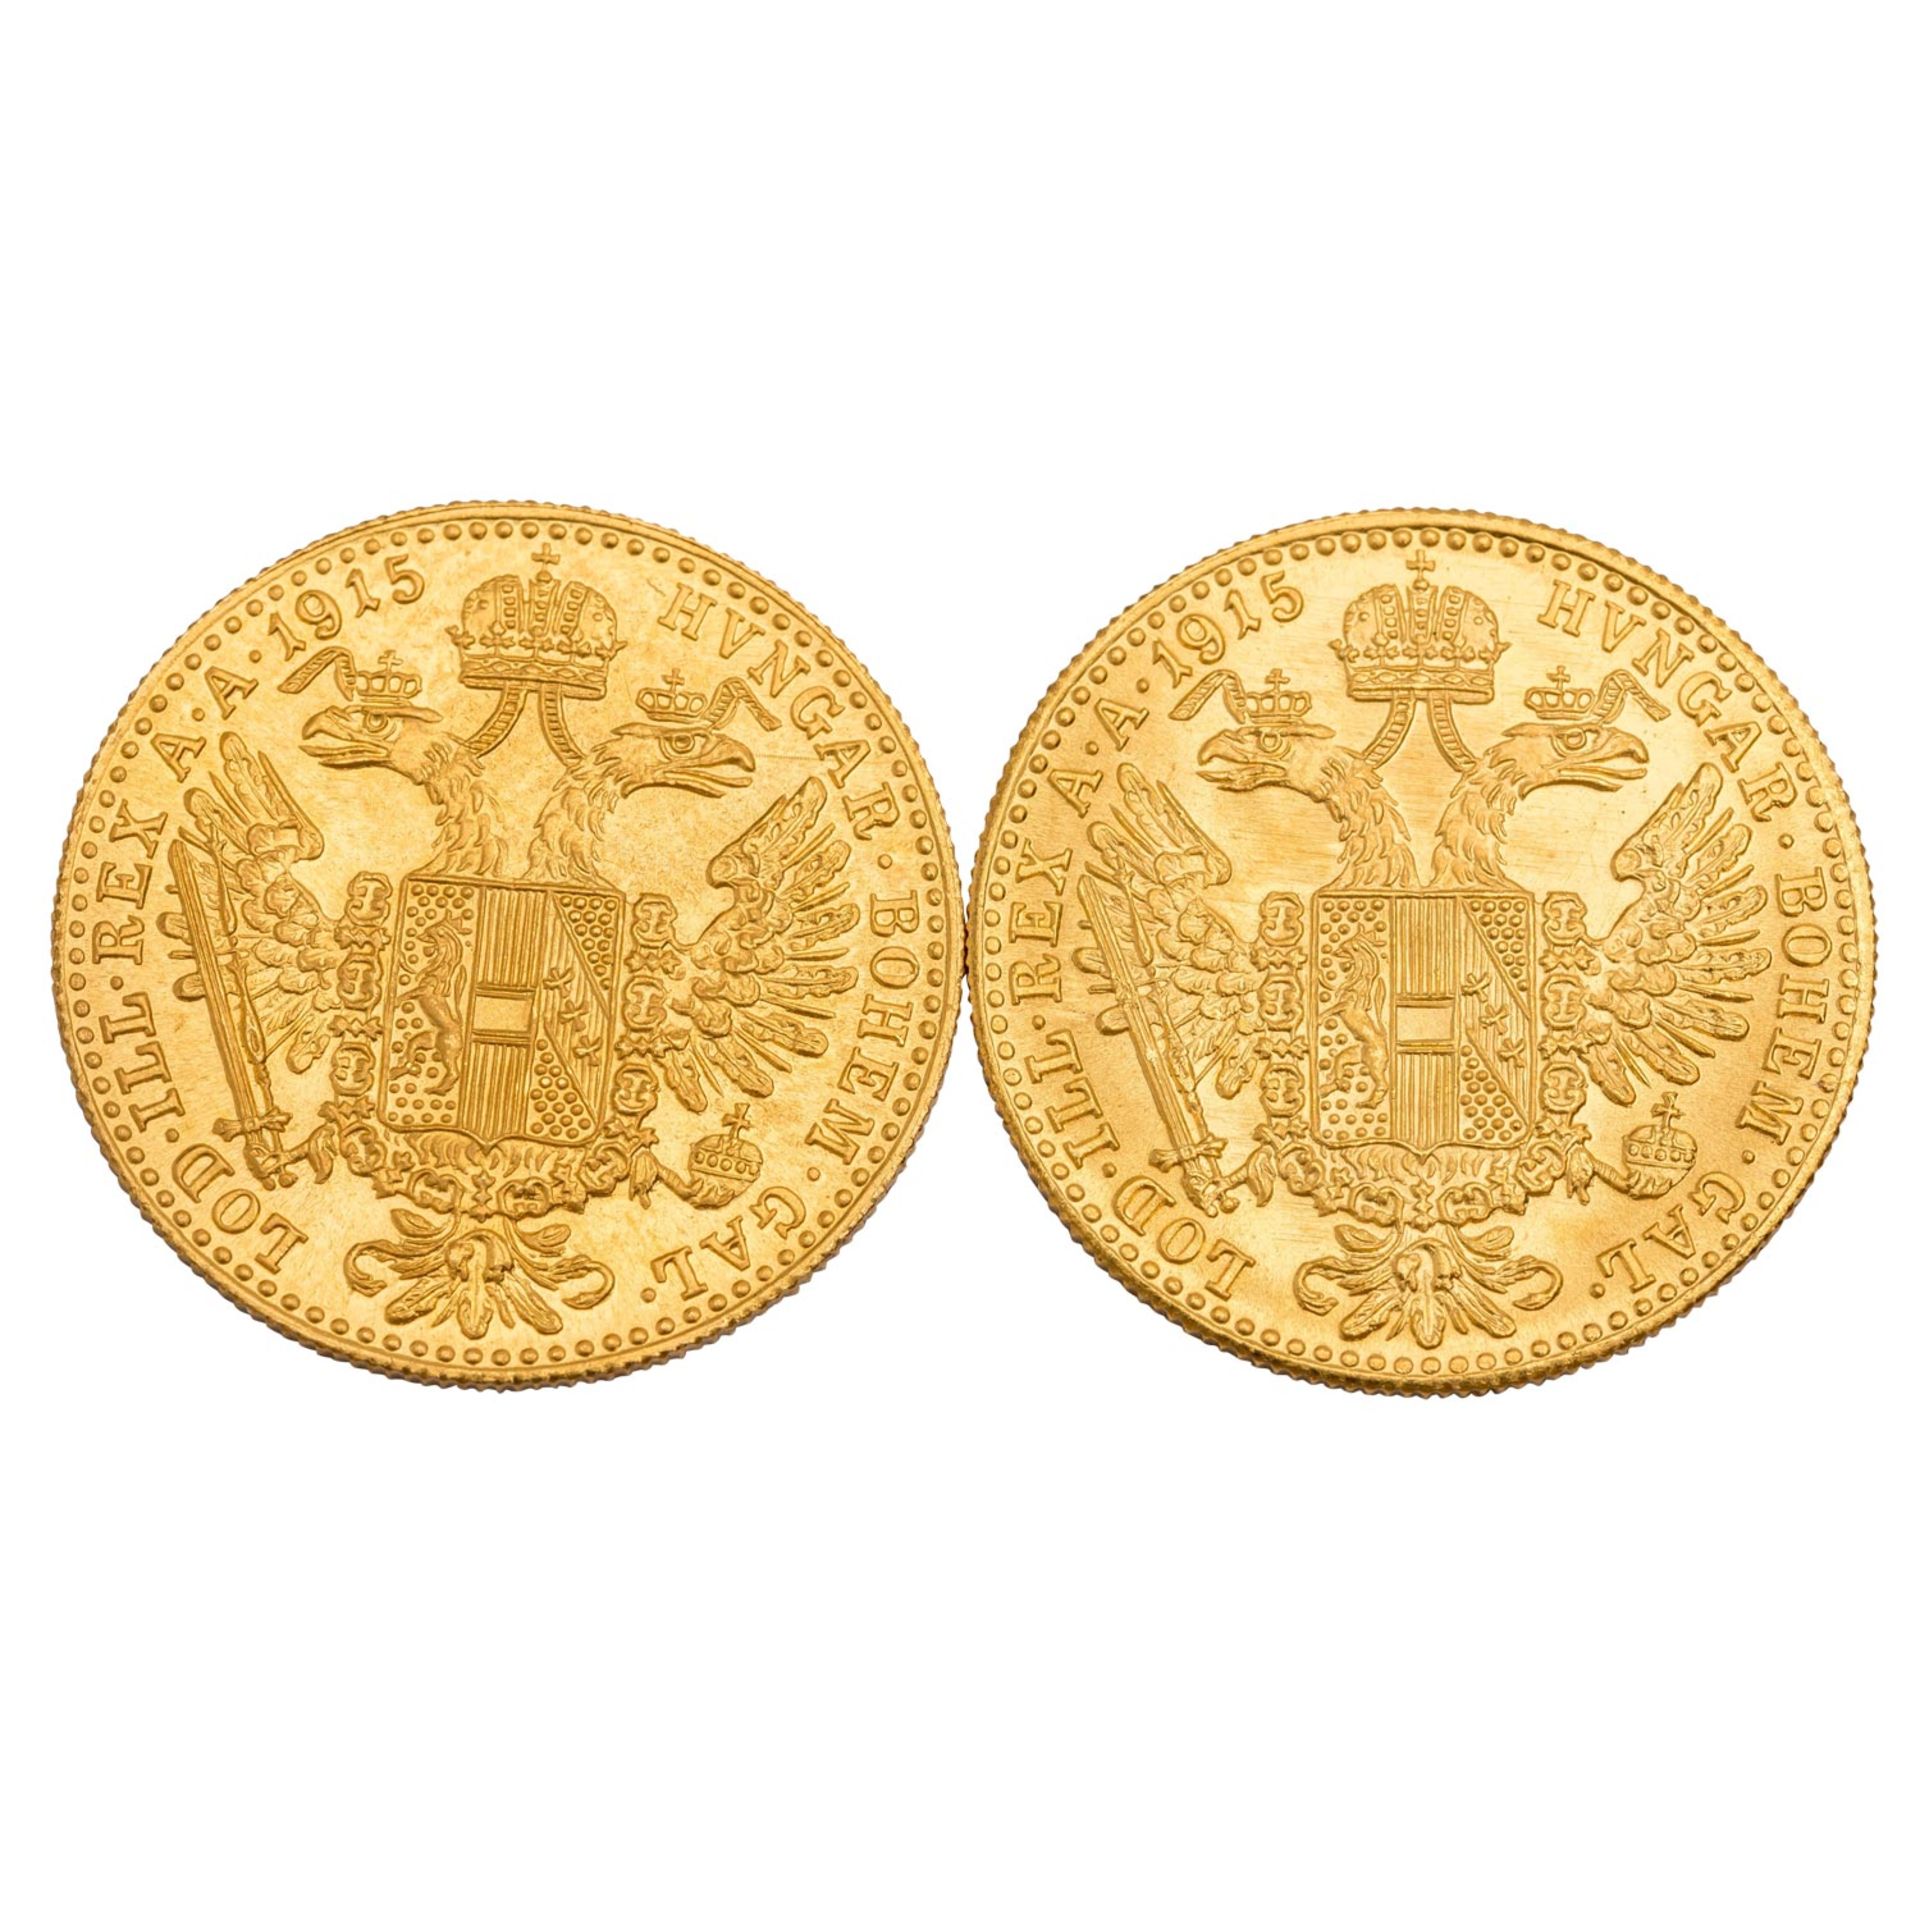 Österreich/GOLD - 2 x 1 Dukat 1915/NP - Image 2 of 2